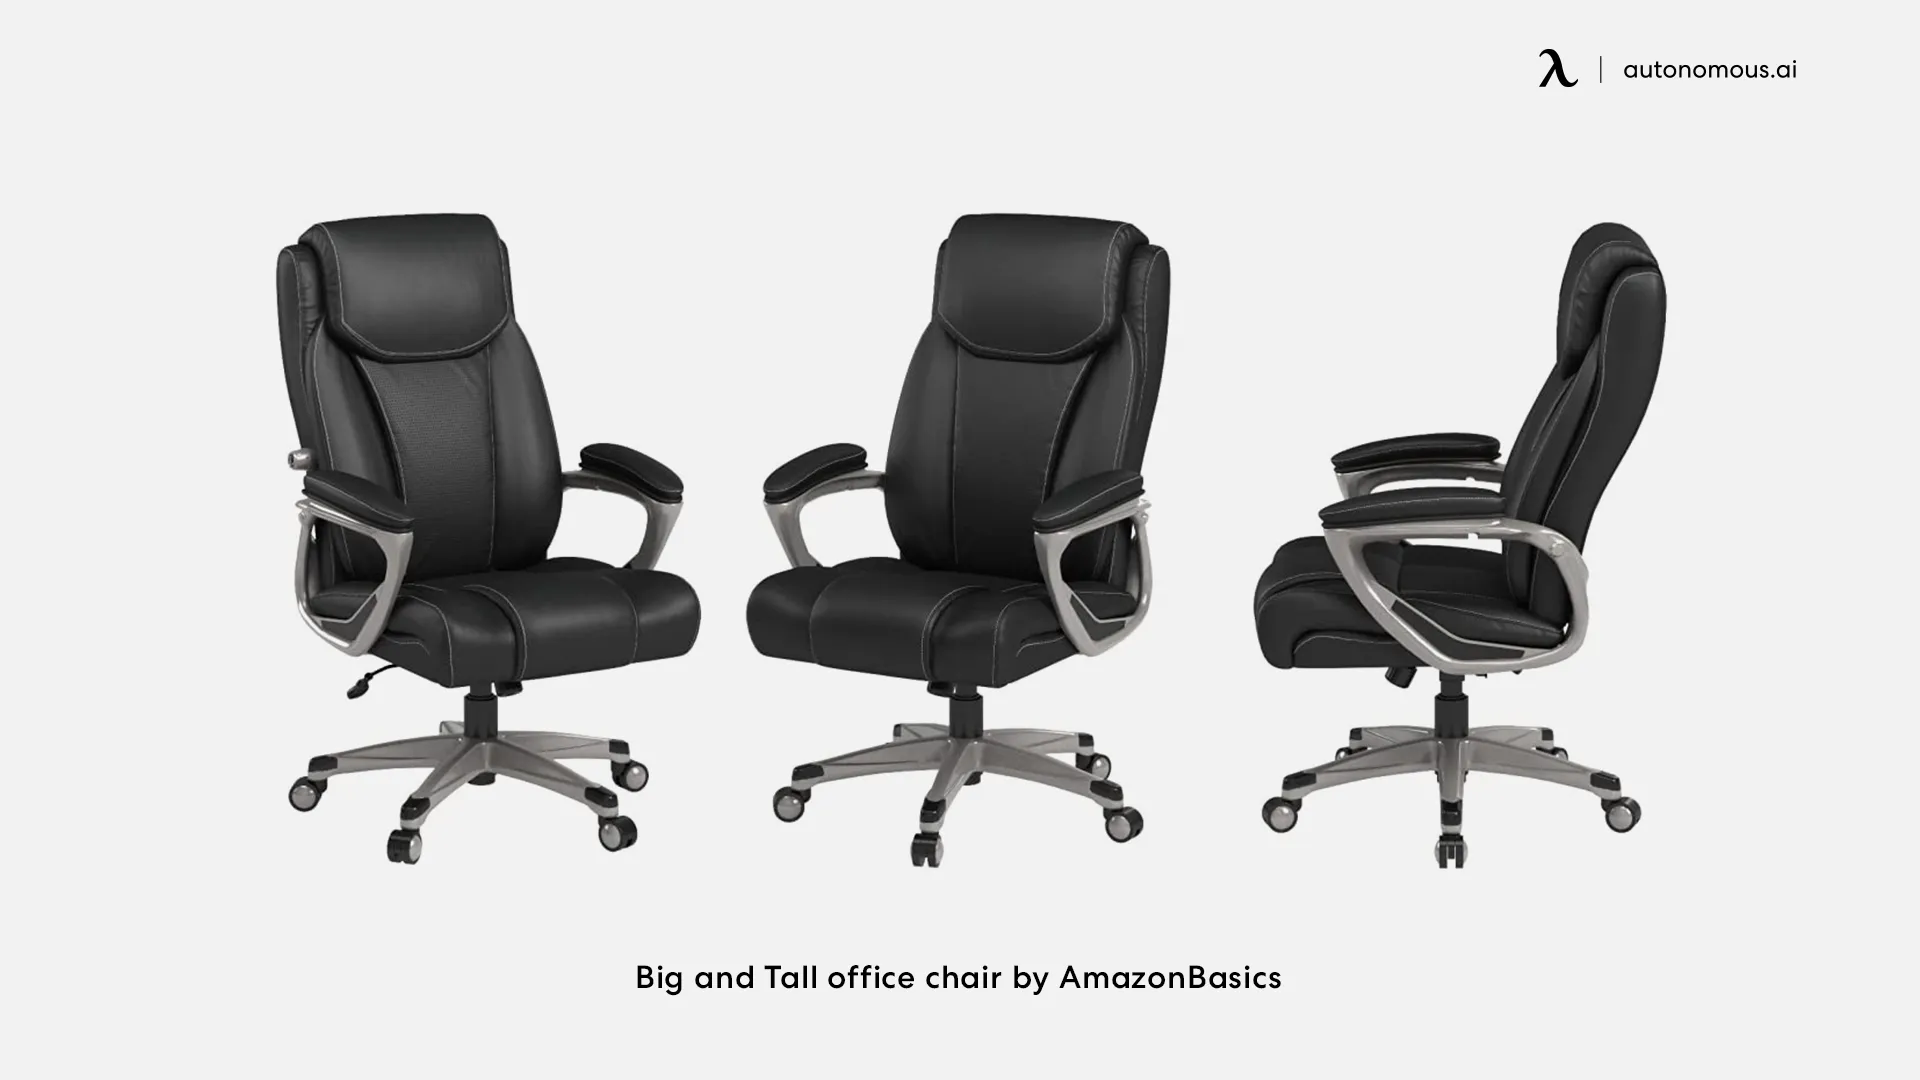 Big and Tall office chair by AmazonBasics